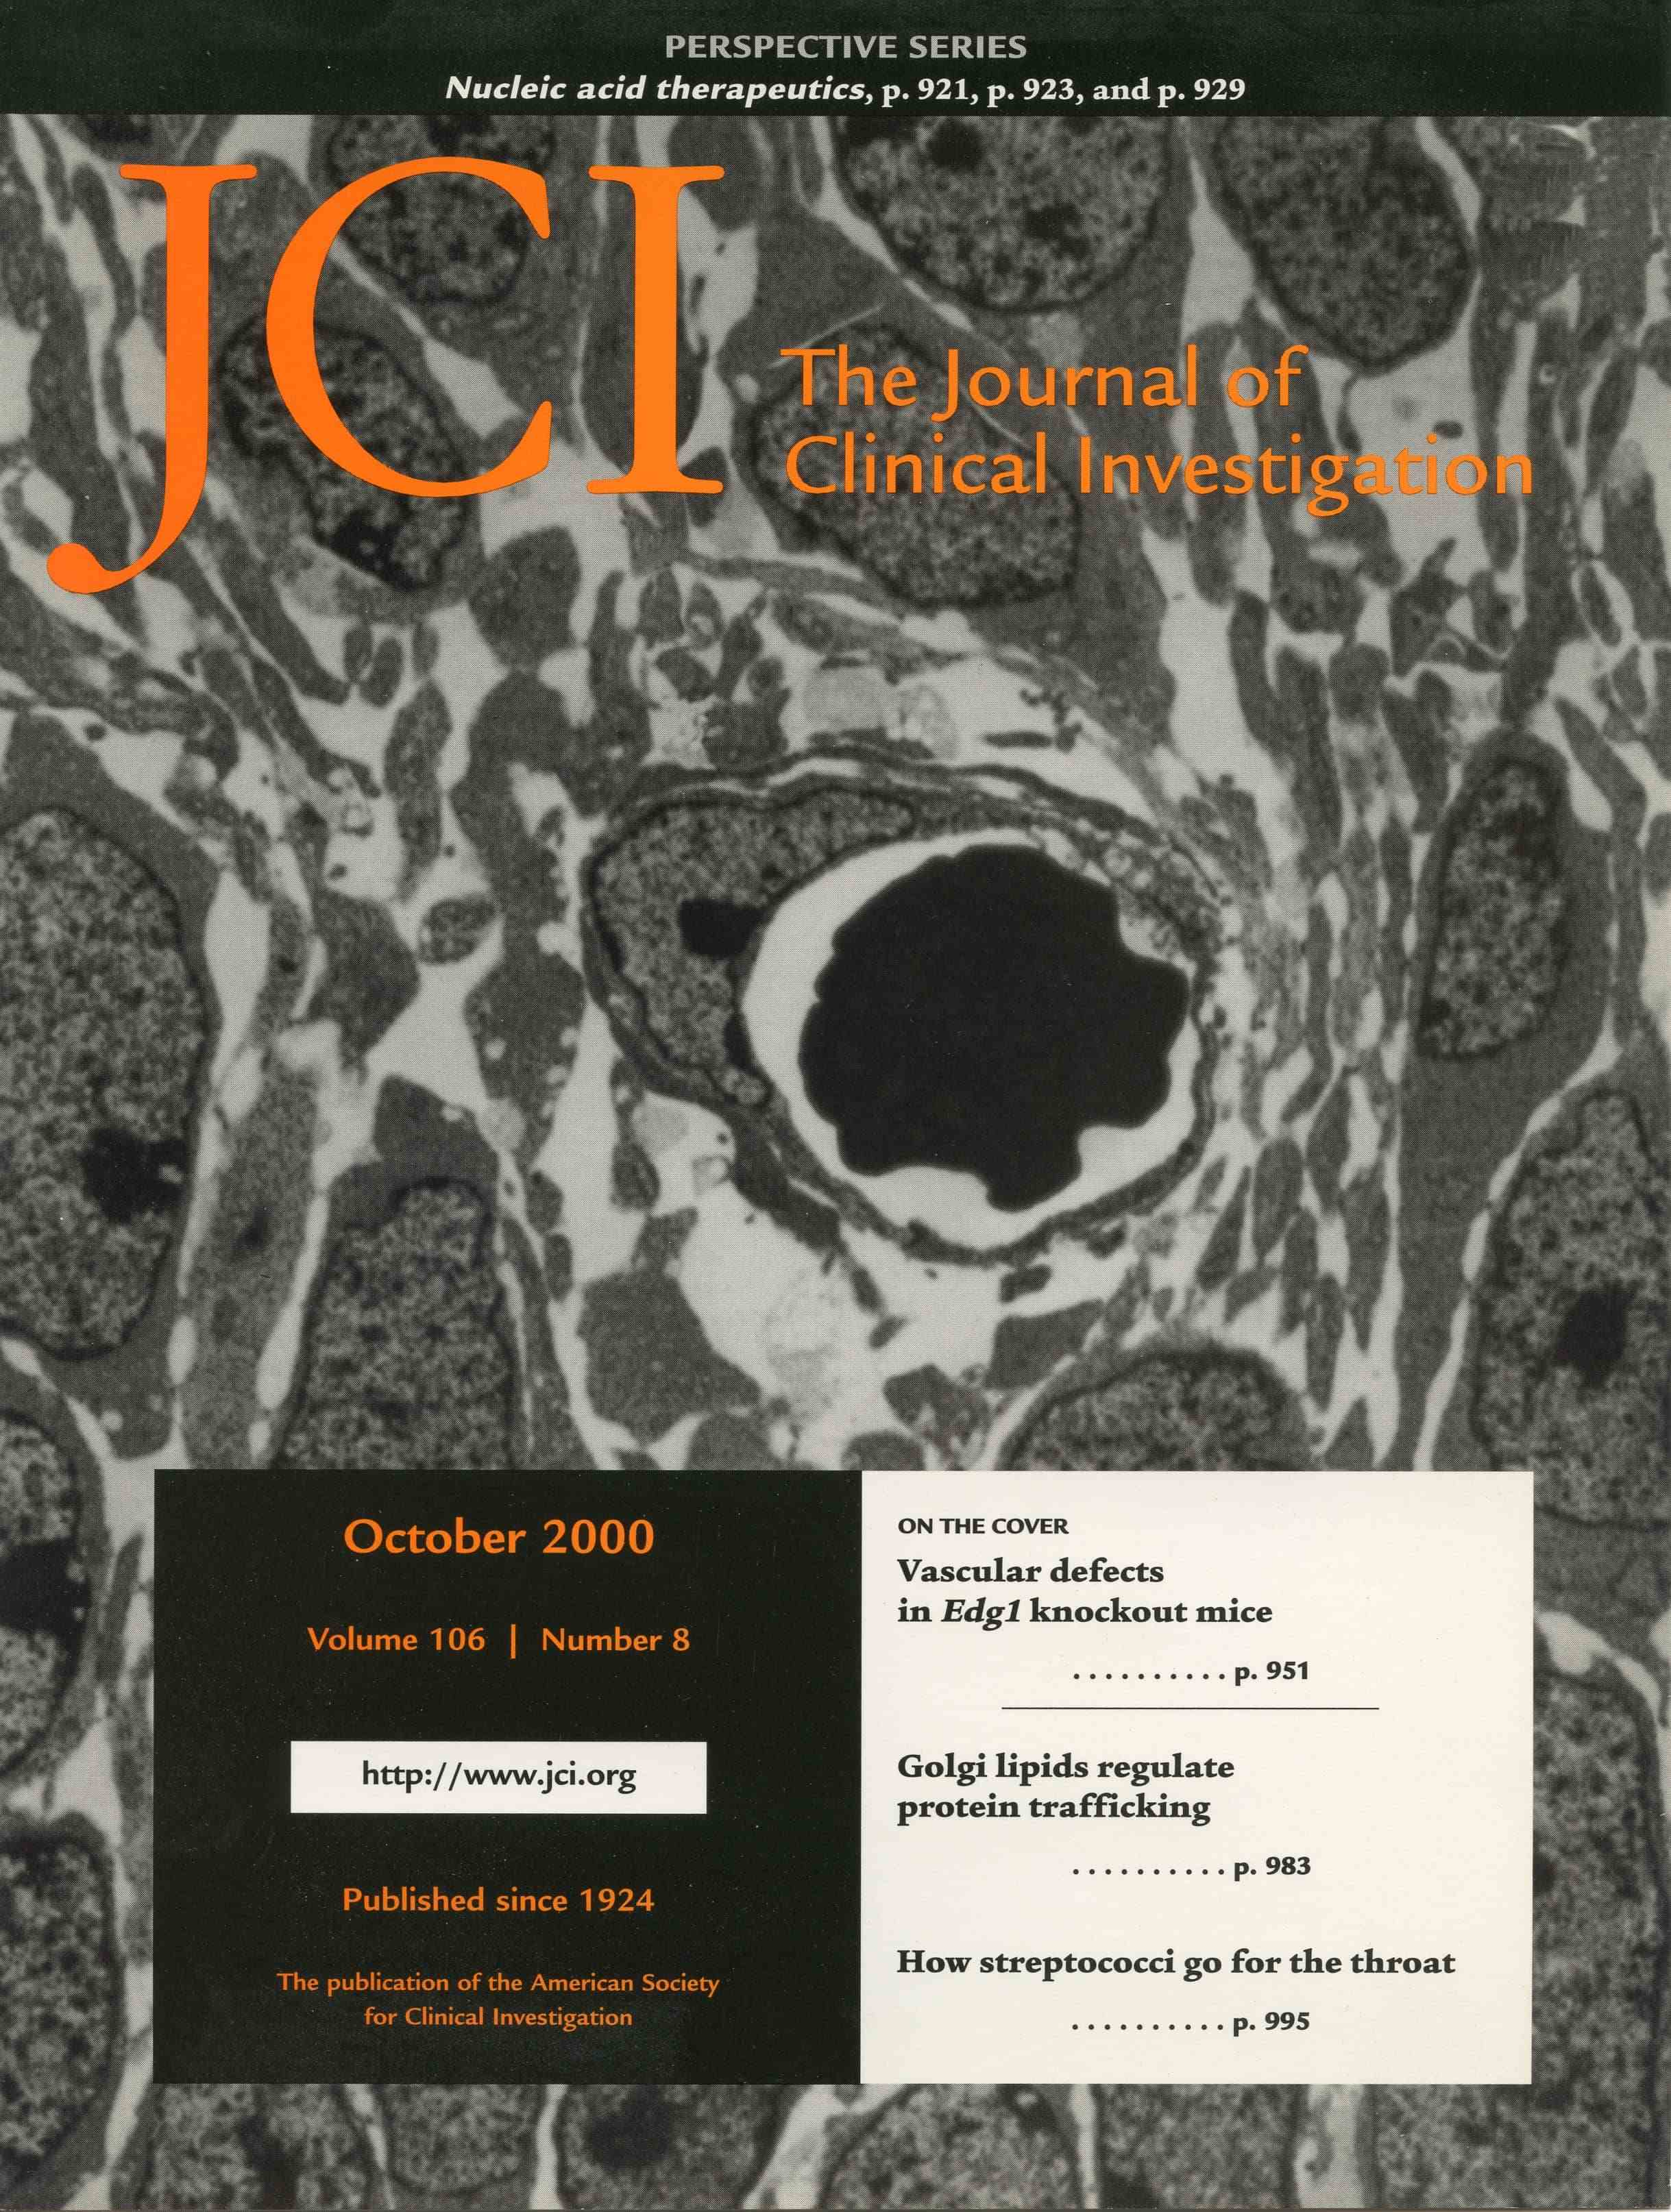 2000 cover of the Journal of Clinical Investigation.